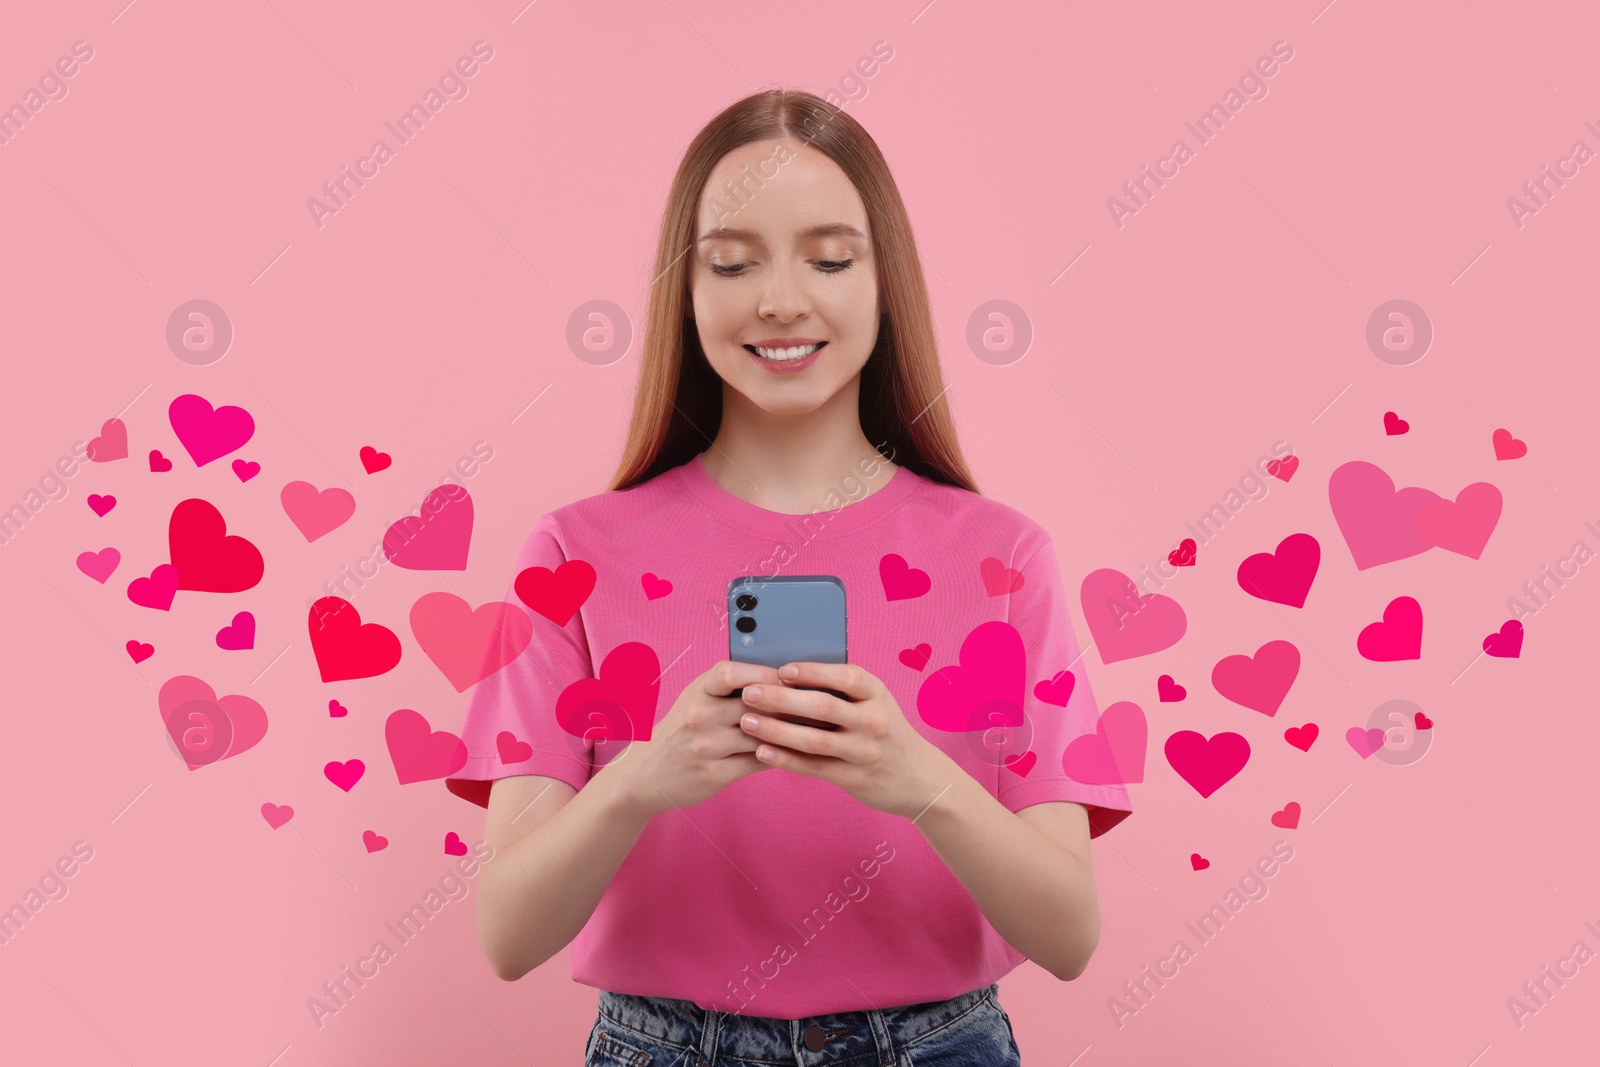 Image of Long distance love. Woman chatting with sweetheart via smartphone on pink background. Hearts flying out of device and swirling around her